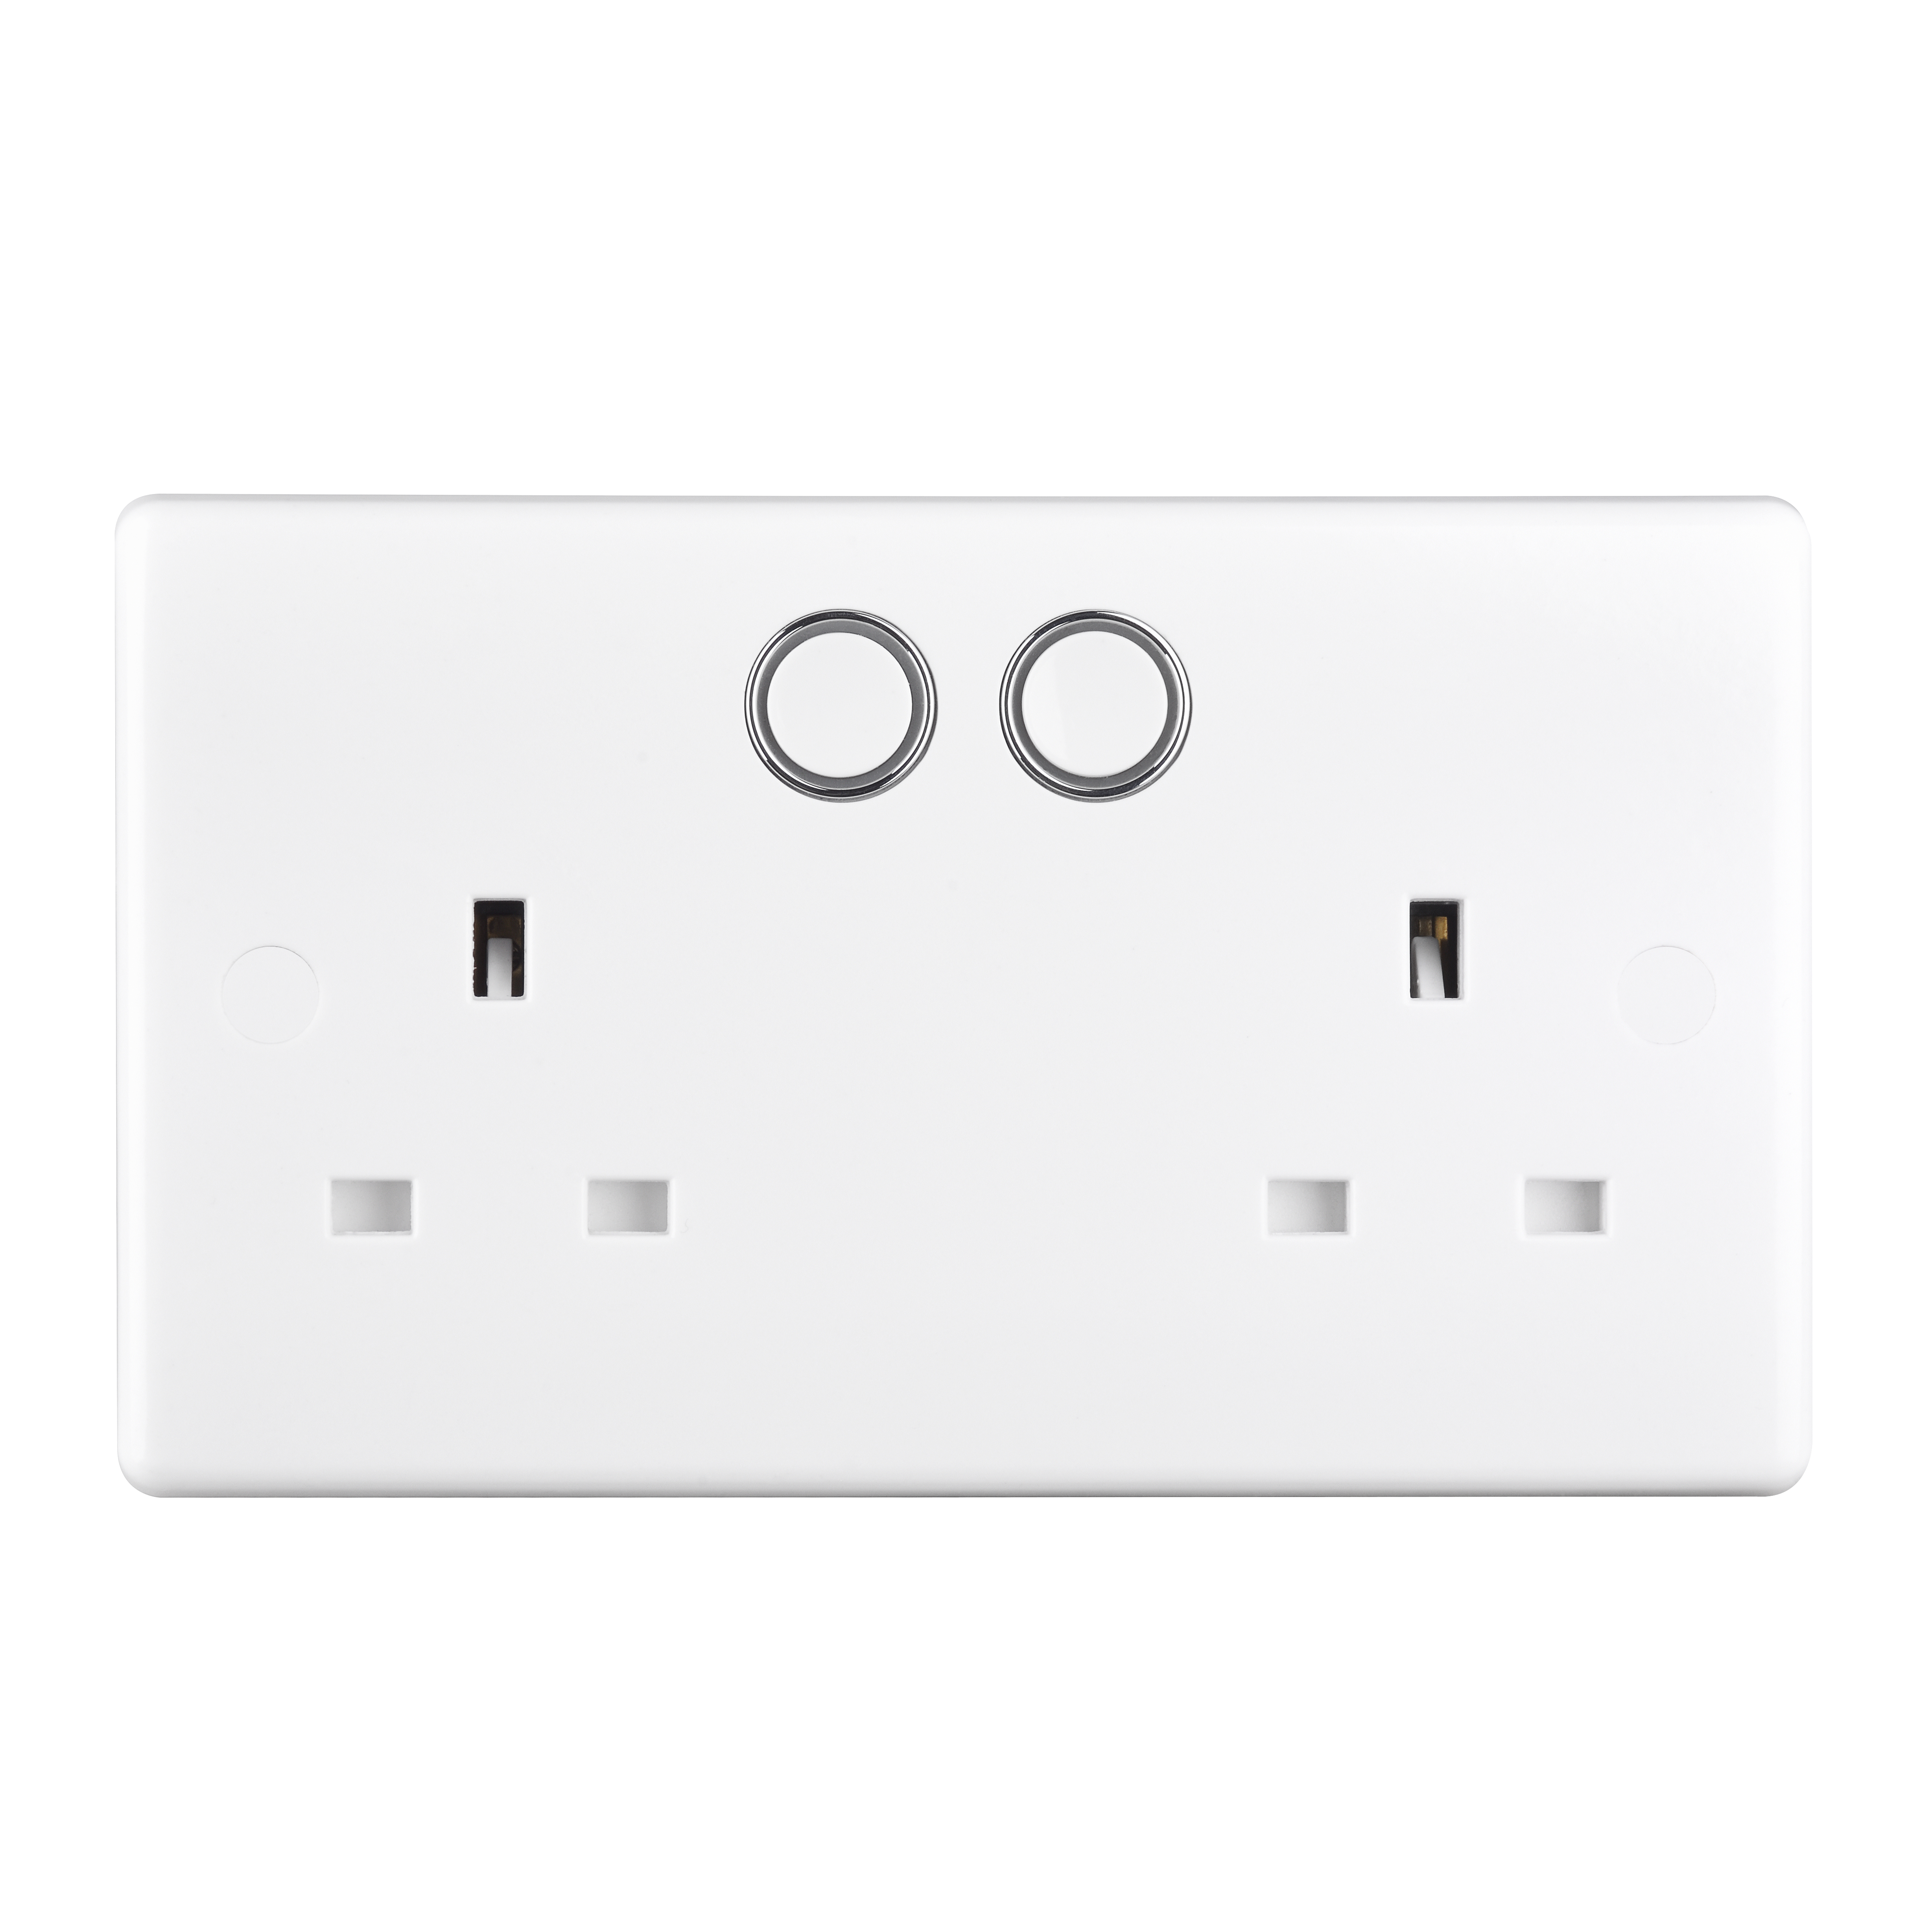 822HC_01-BGWifiControlledWallSocket(UK)-F-withscrewcovers.png